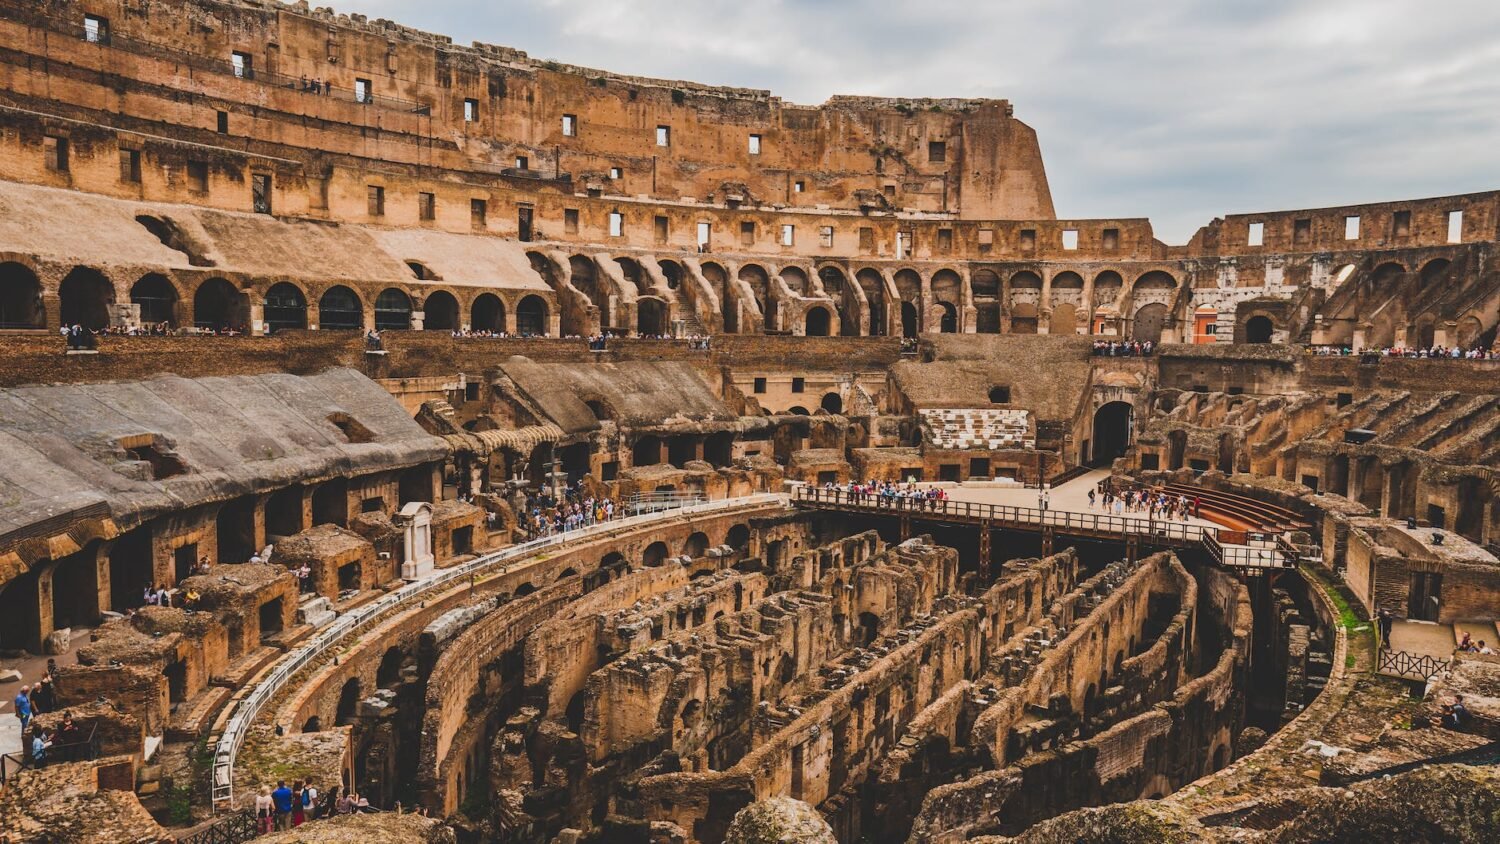 Skip the Line: Colosseum Small Group Tour with Roman Forum & Palatine Hill